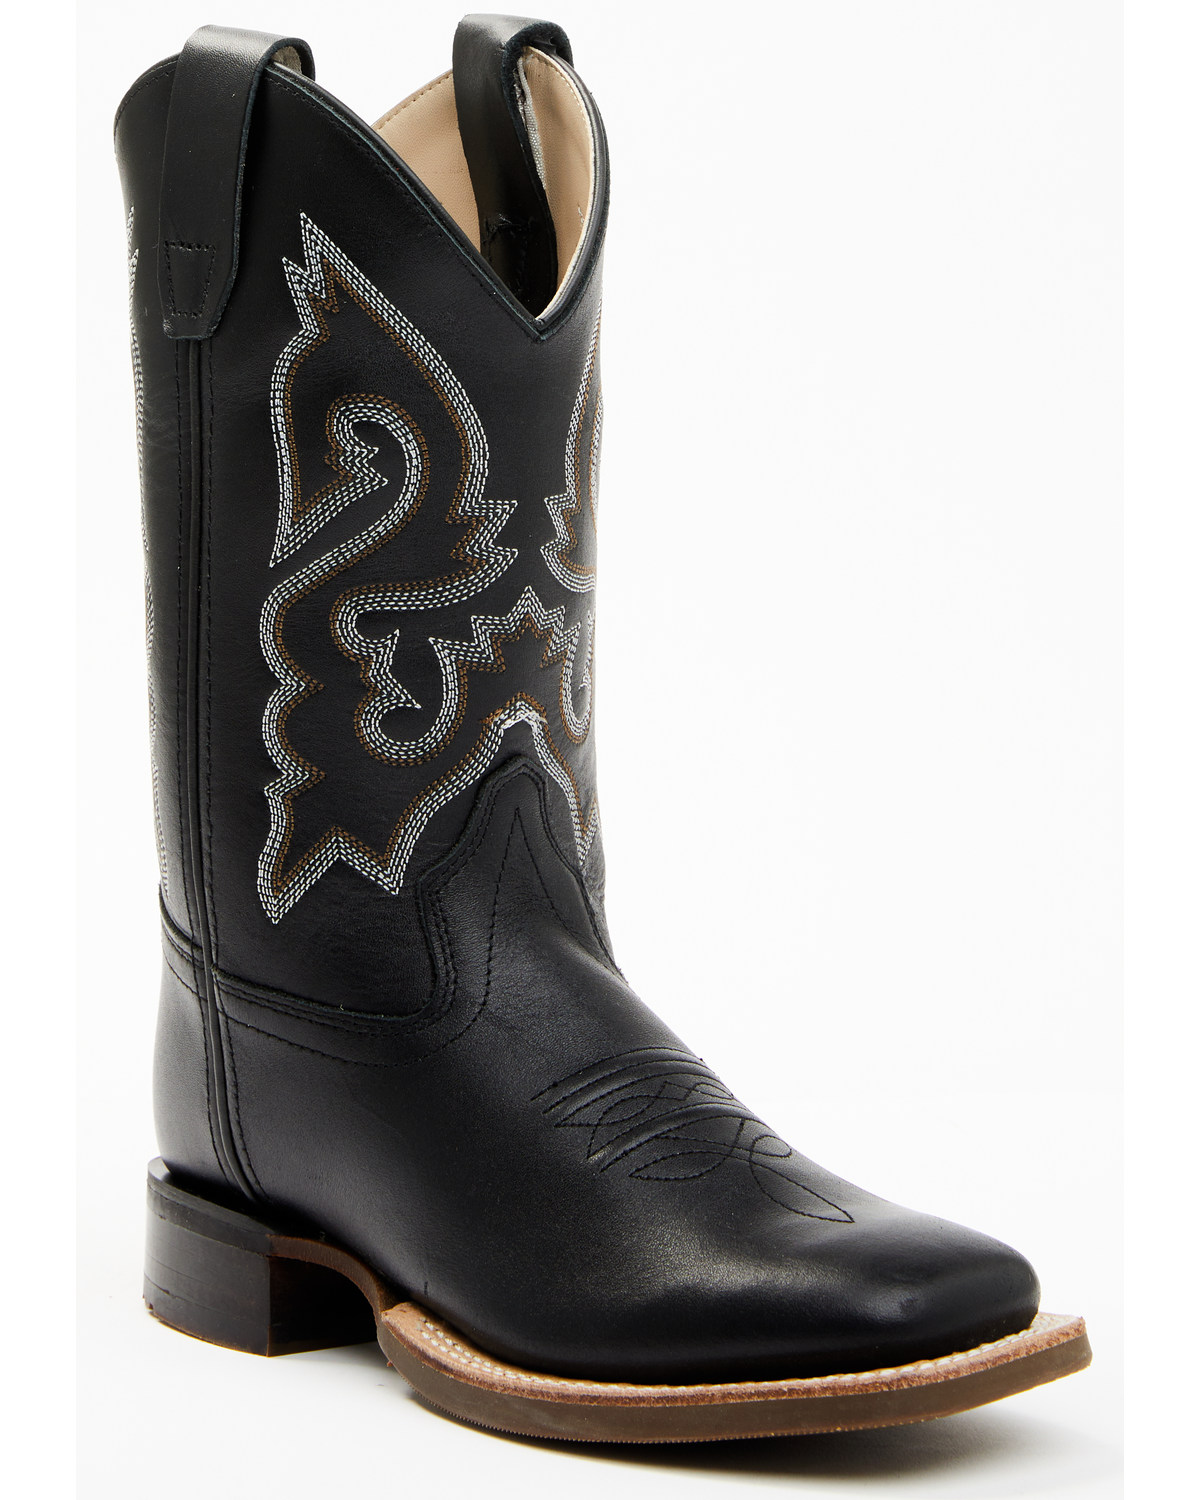 Cody James Boys' Ranger Western Boots - Broad Square Toe